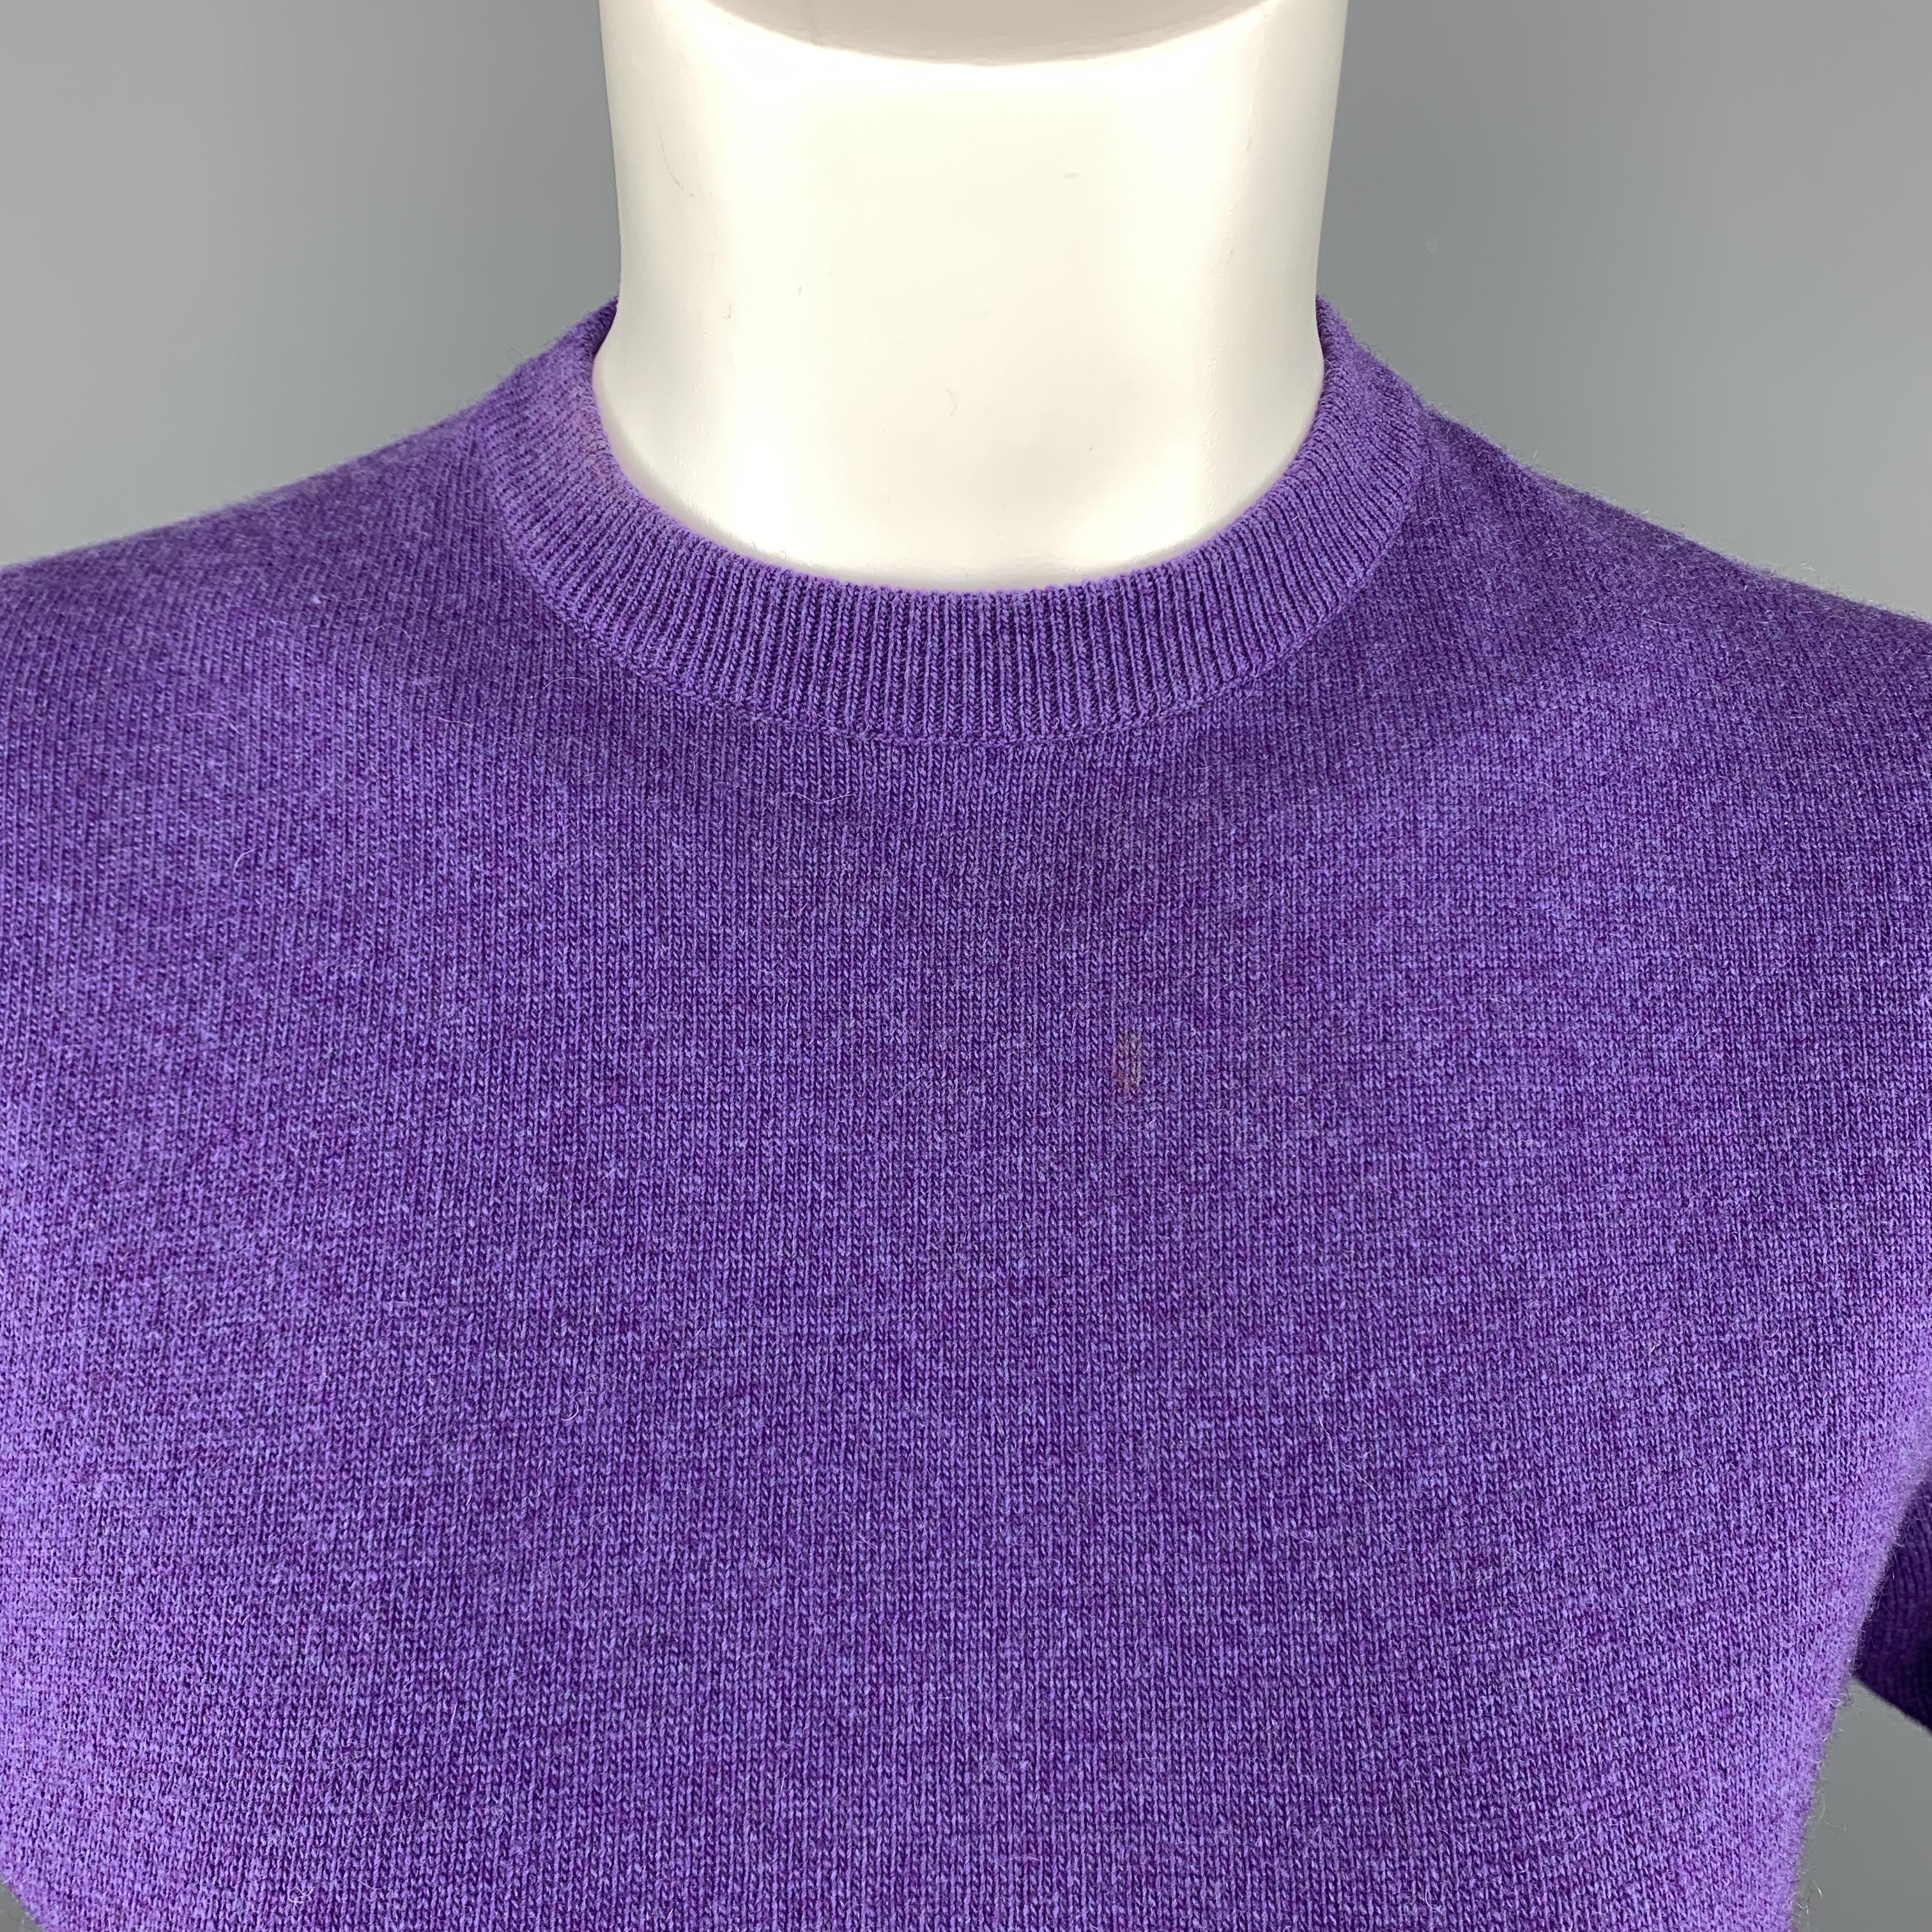 HERMES Pullover Sweater comes in a purple tone in a heather cashmere / viscose material, with a crewneck, short sleeves and ribbed cuffs and hem. Light mark at front. Made in Scotland.
 
Very Good Pre-Owned Condition.
Marked: M
 
Measurements:
